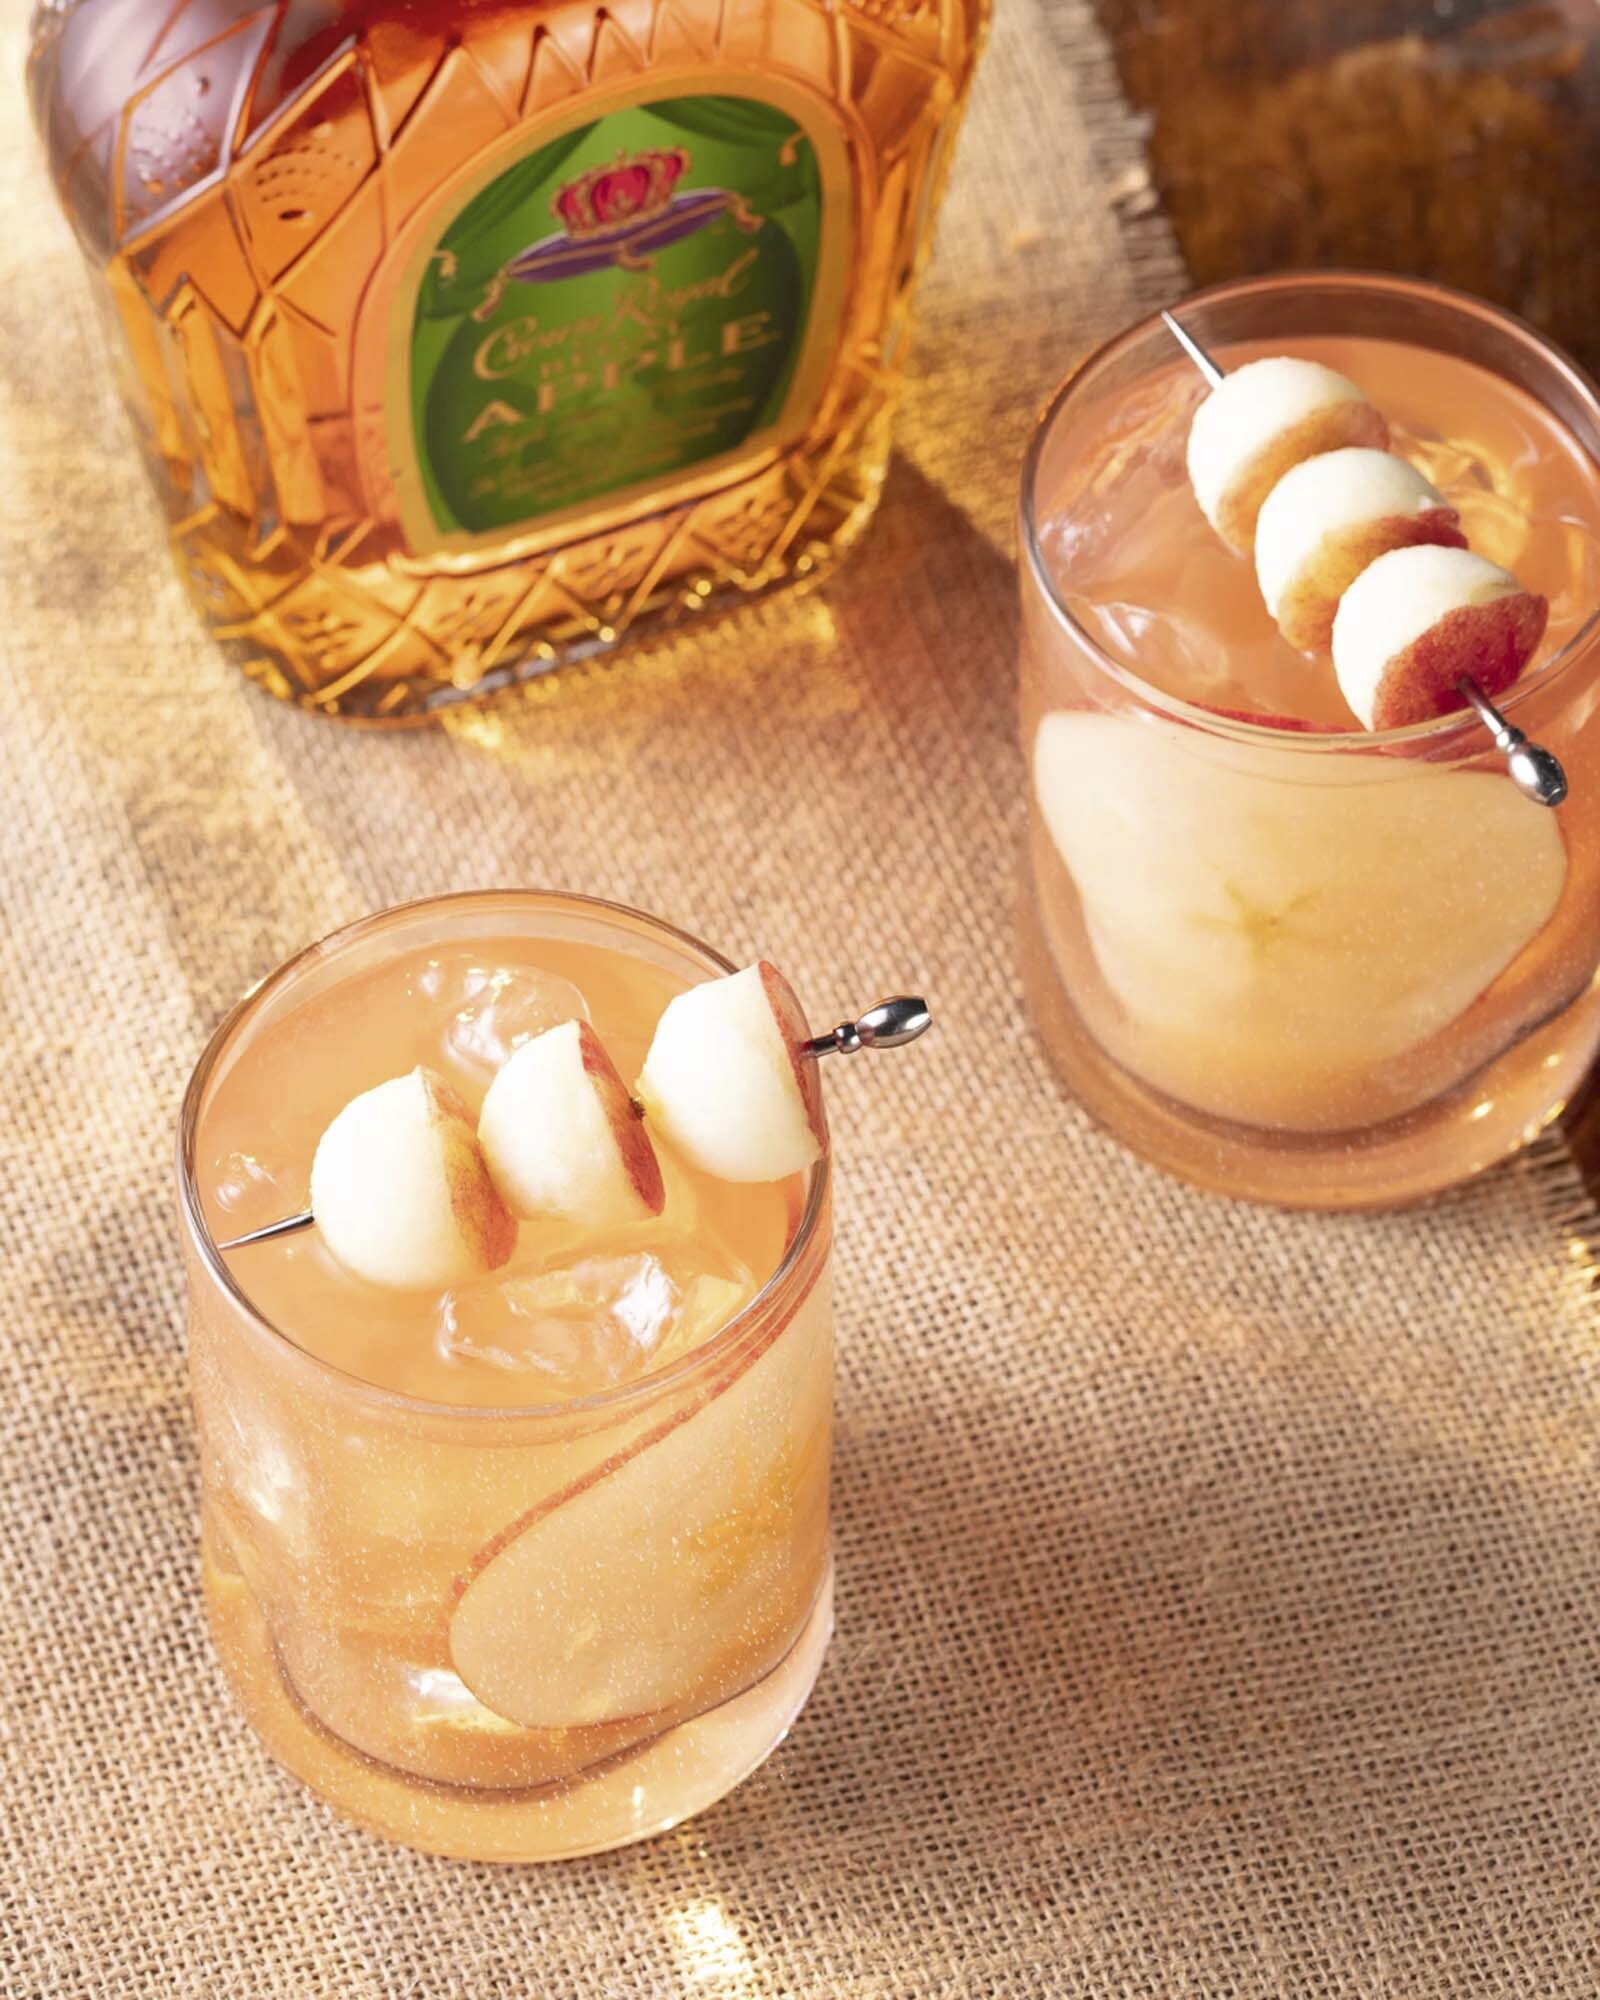 Crown Royal Apple Bomb Whisky Cocktail